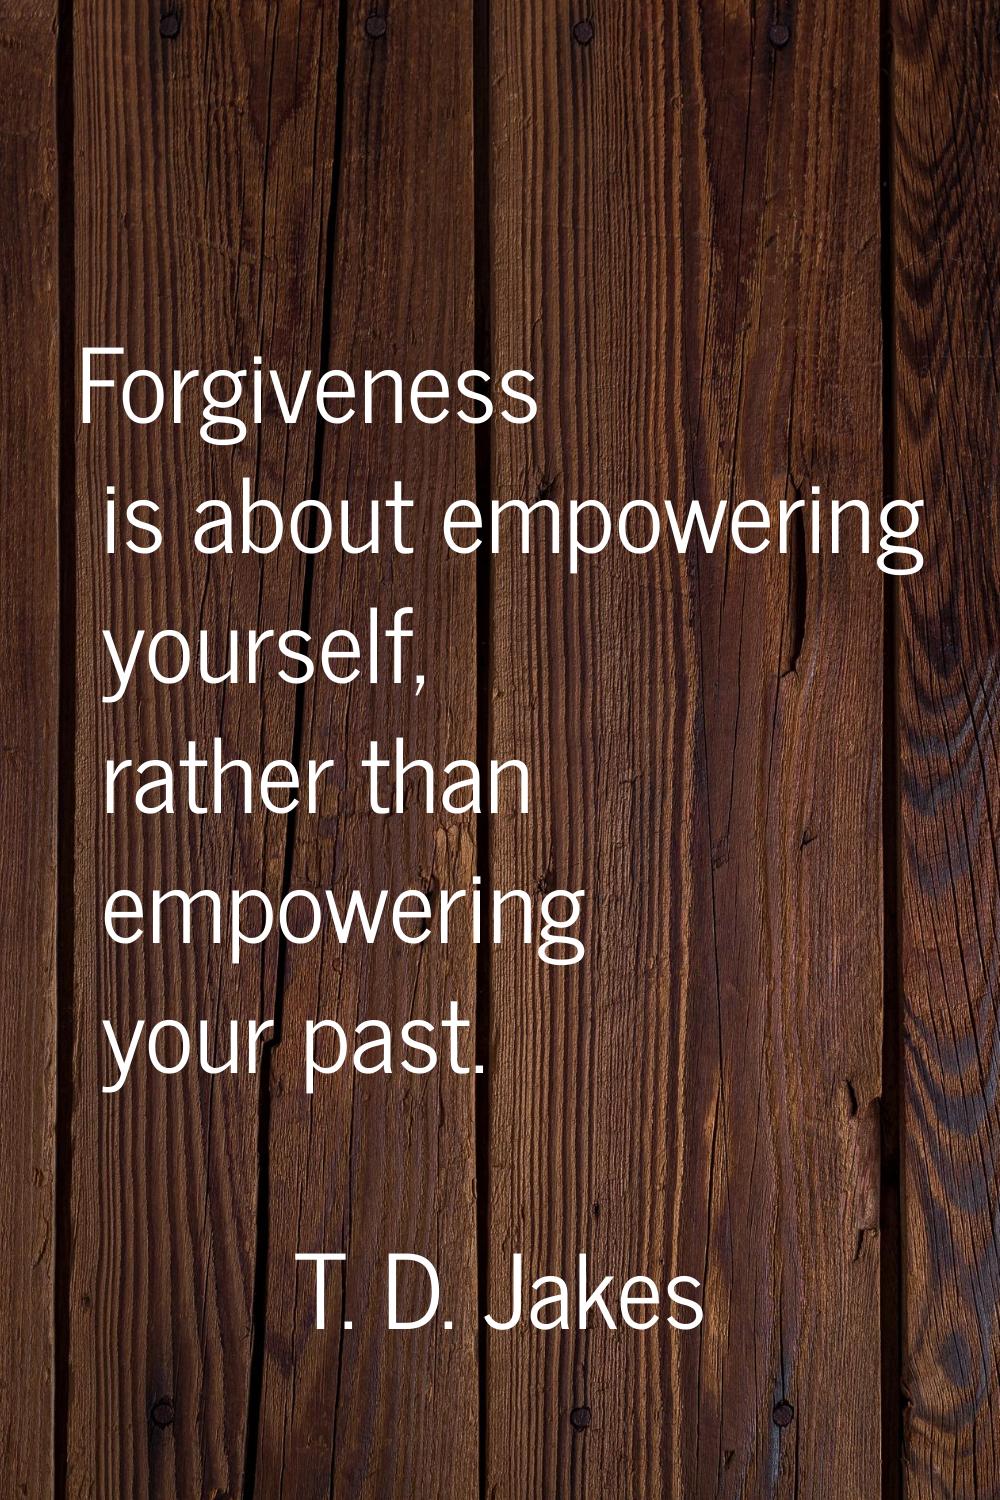 Forgiveness is about empowering yourself, rather than empowering your past.